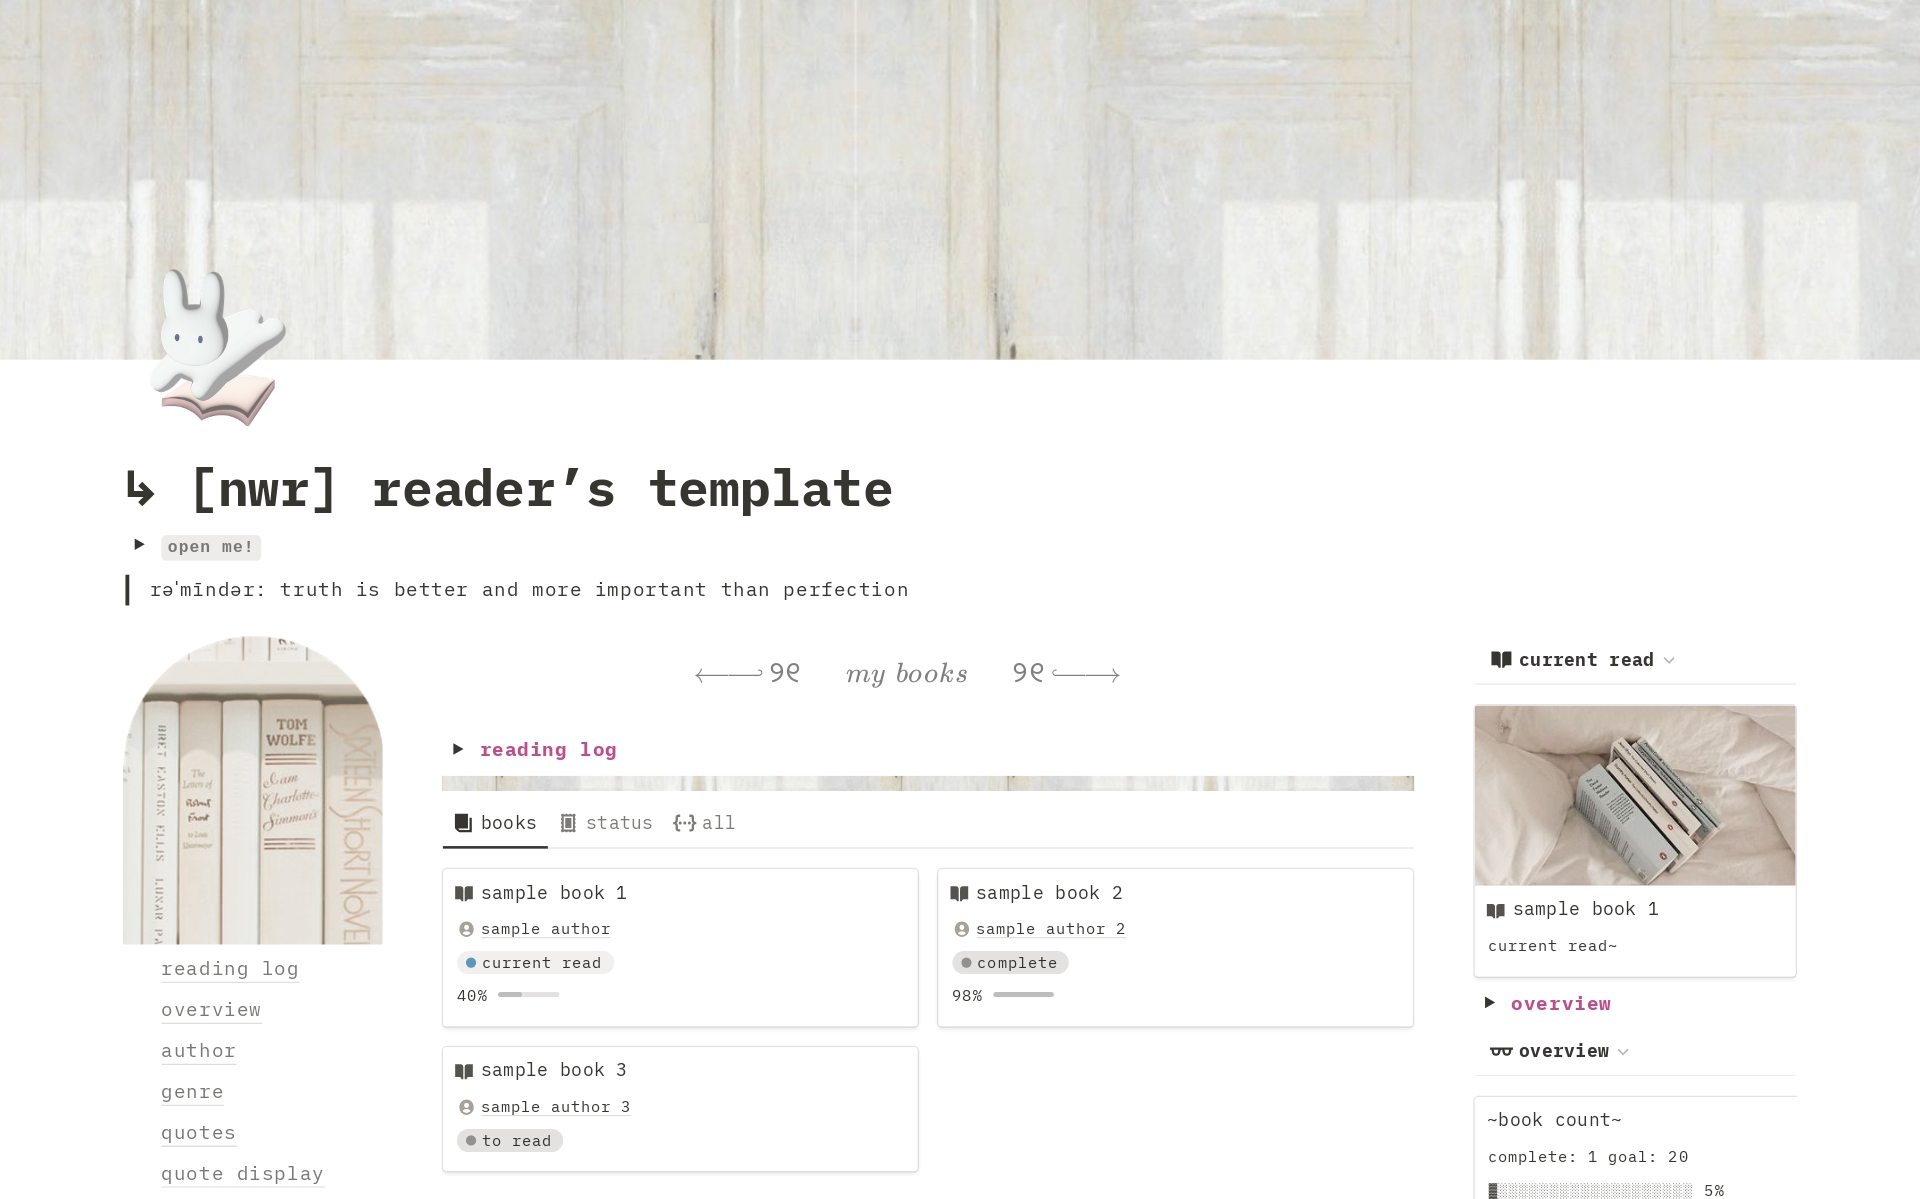 Curated specificially for readers! This template allows you to organize all things related to reading while staying motivated throughout your reading journey. 